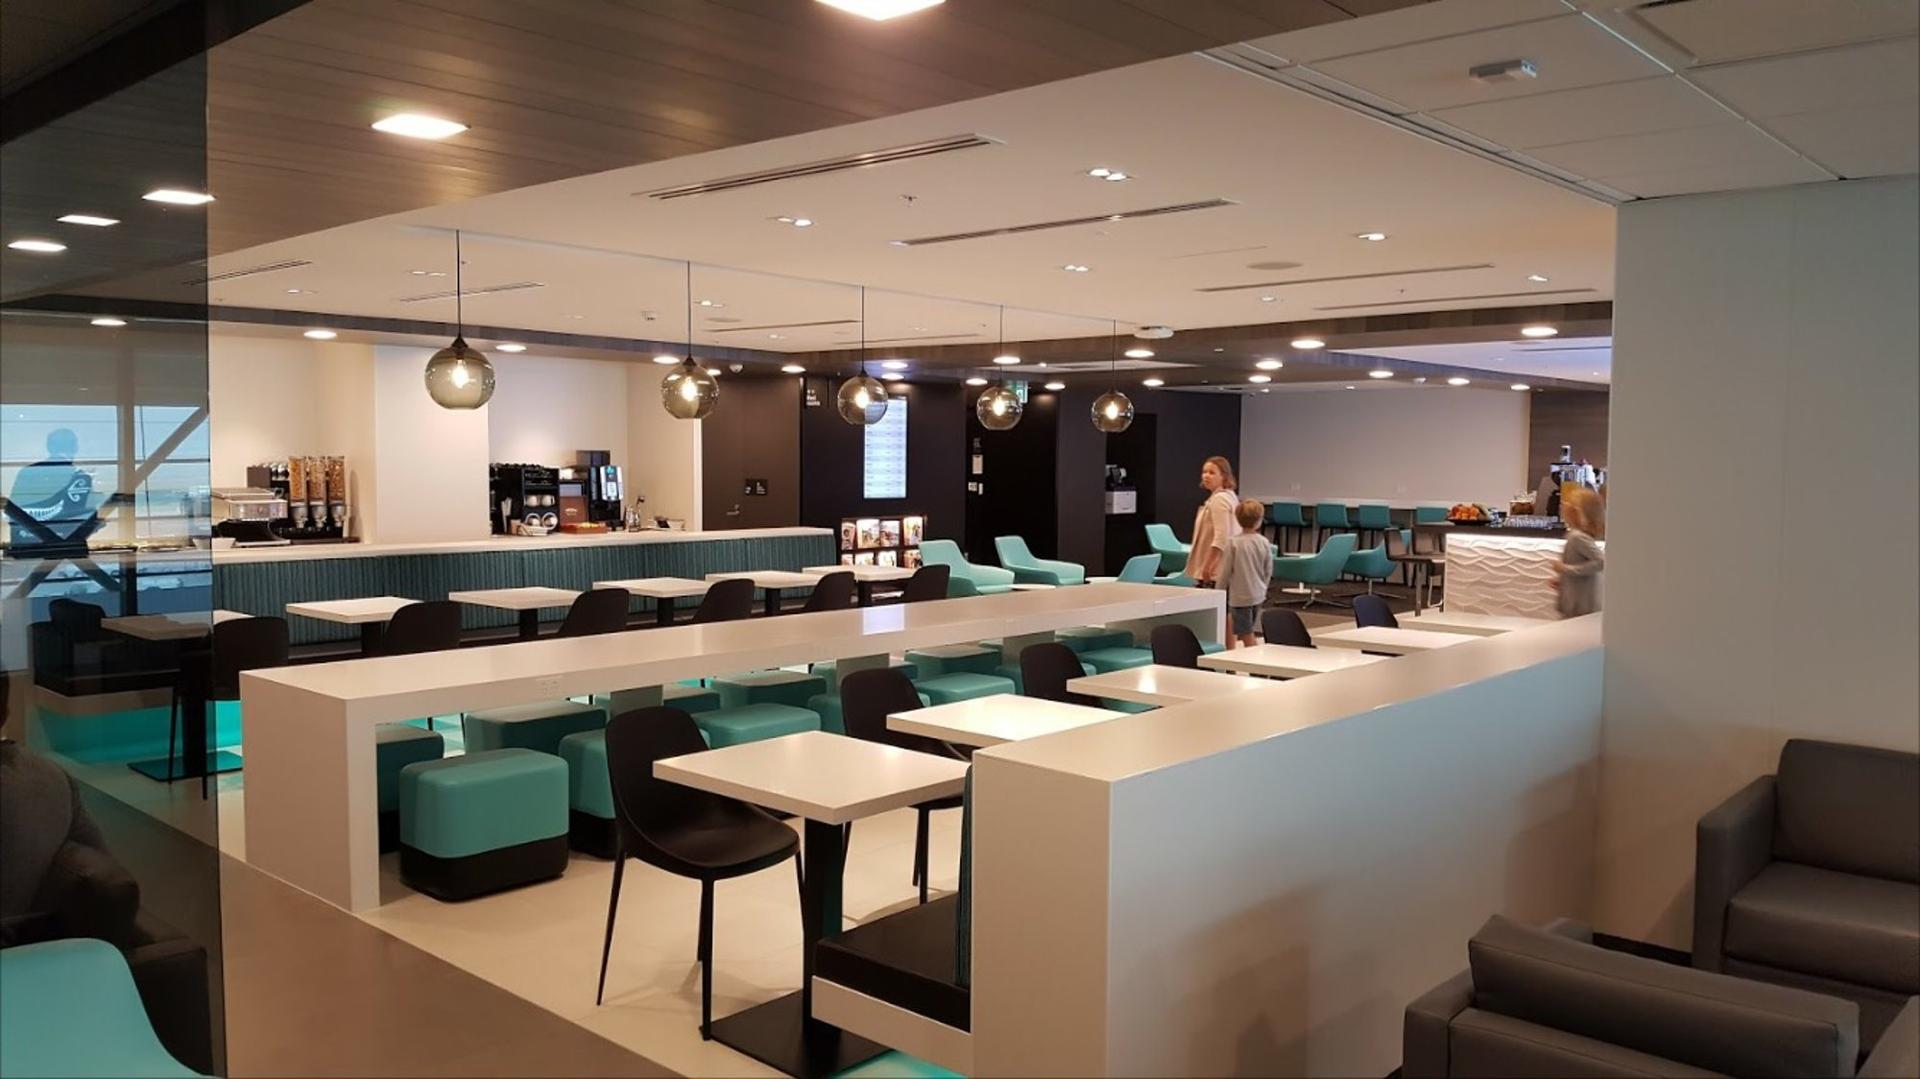 Air New Zealand Regional Lounge image 2 of 8